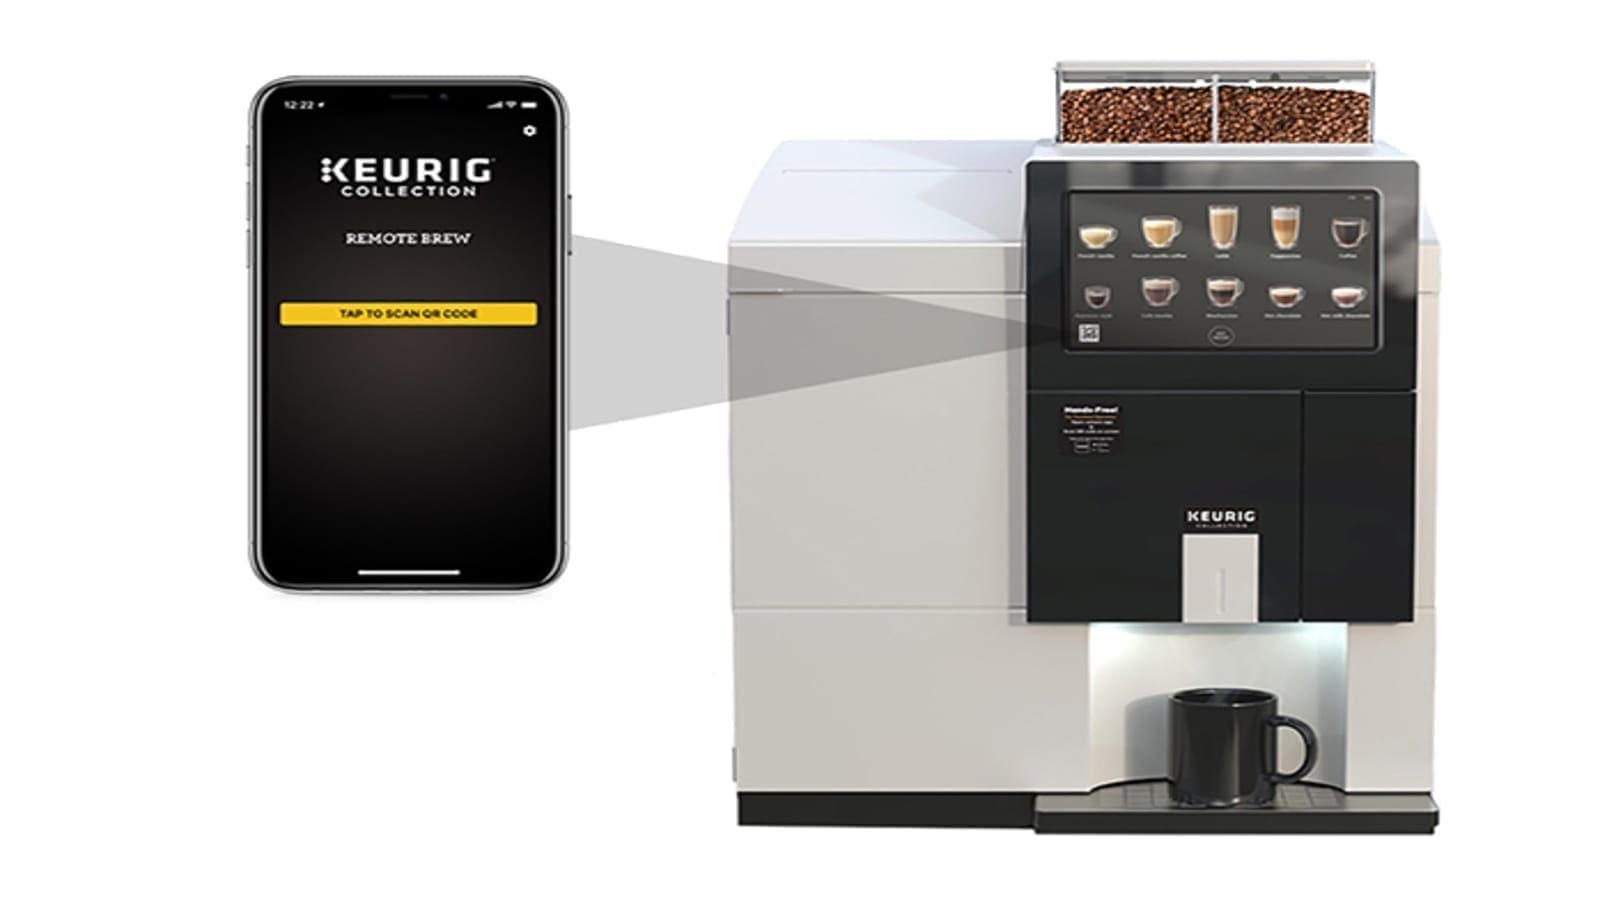 Keurig introduces new lineup of brewer colors in partnership with